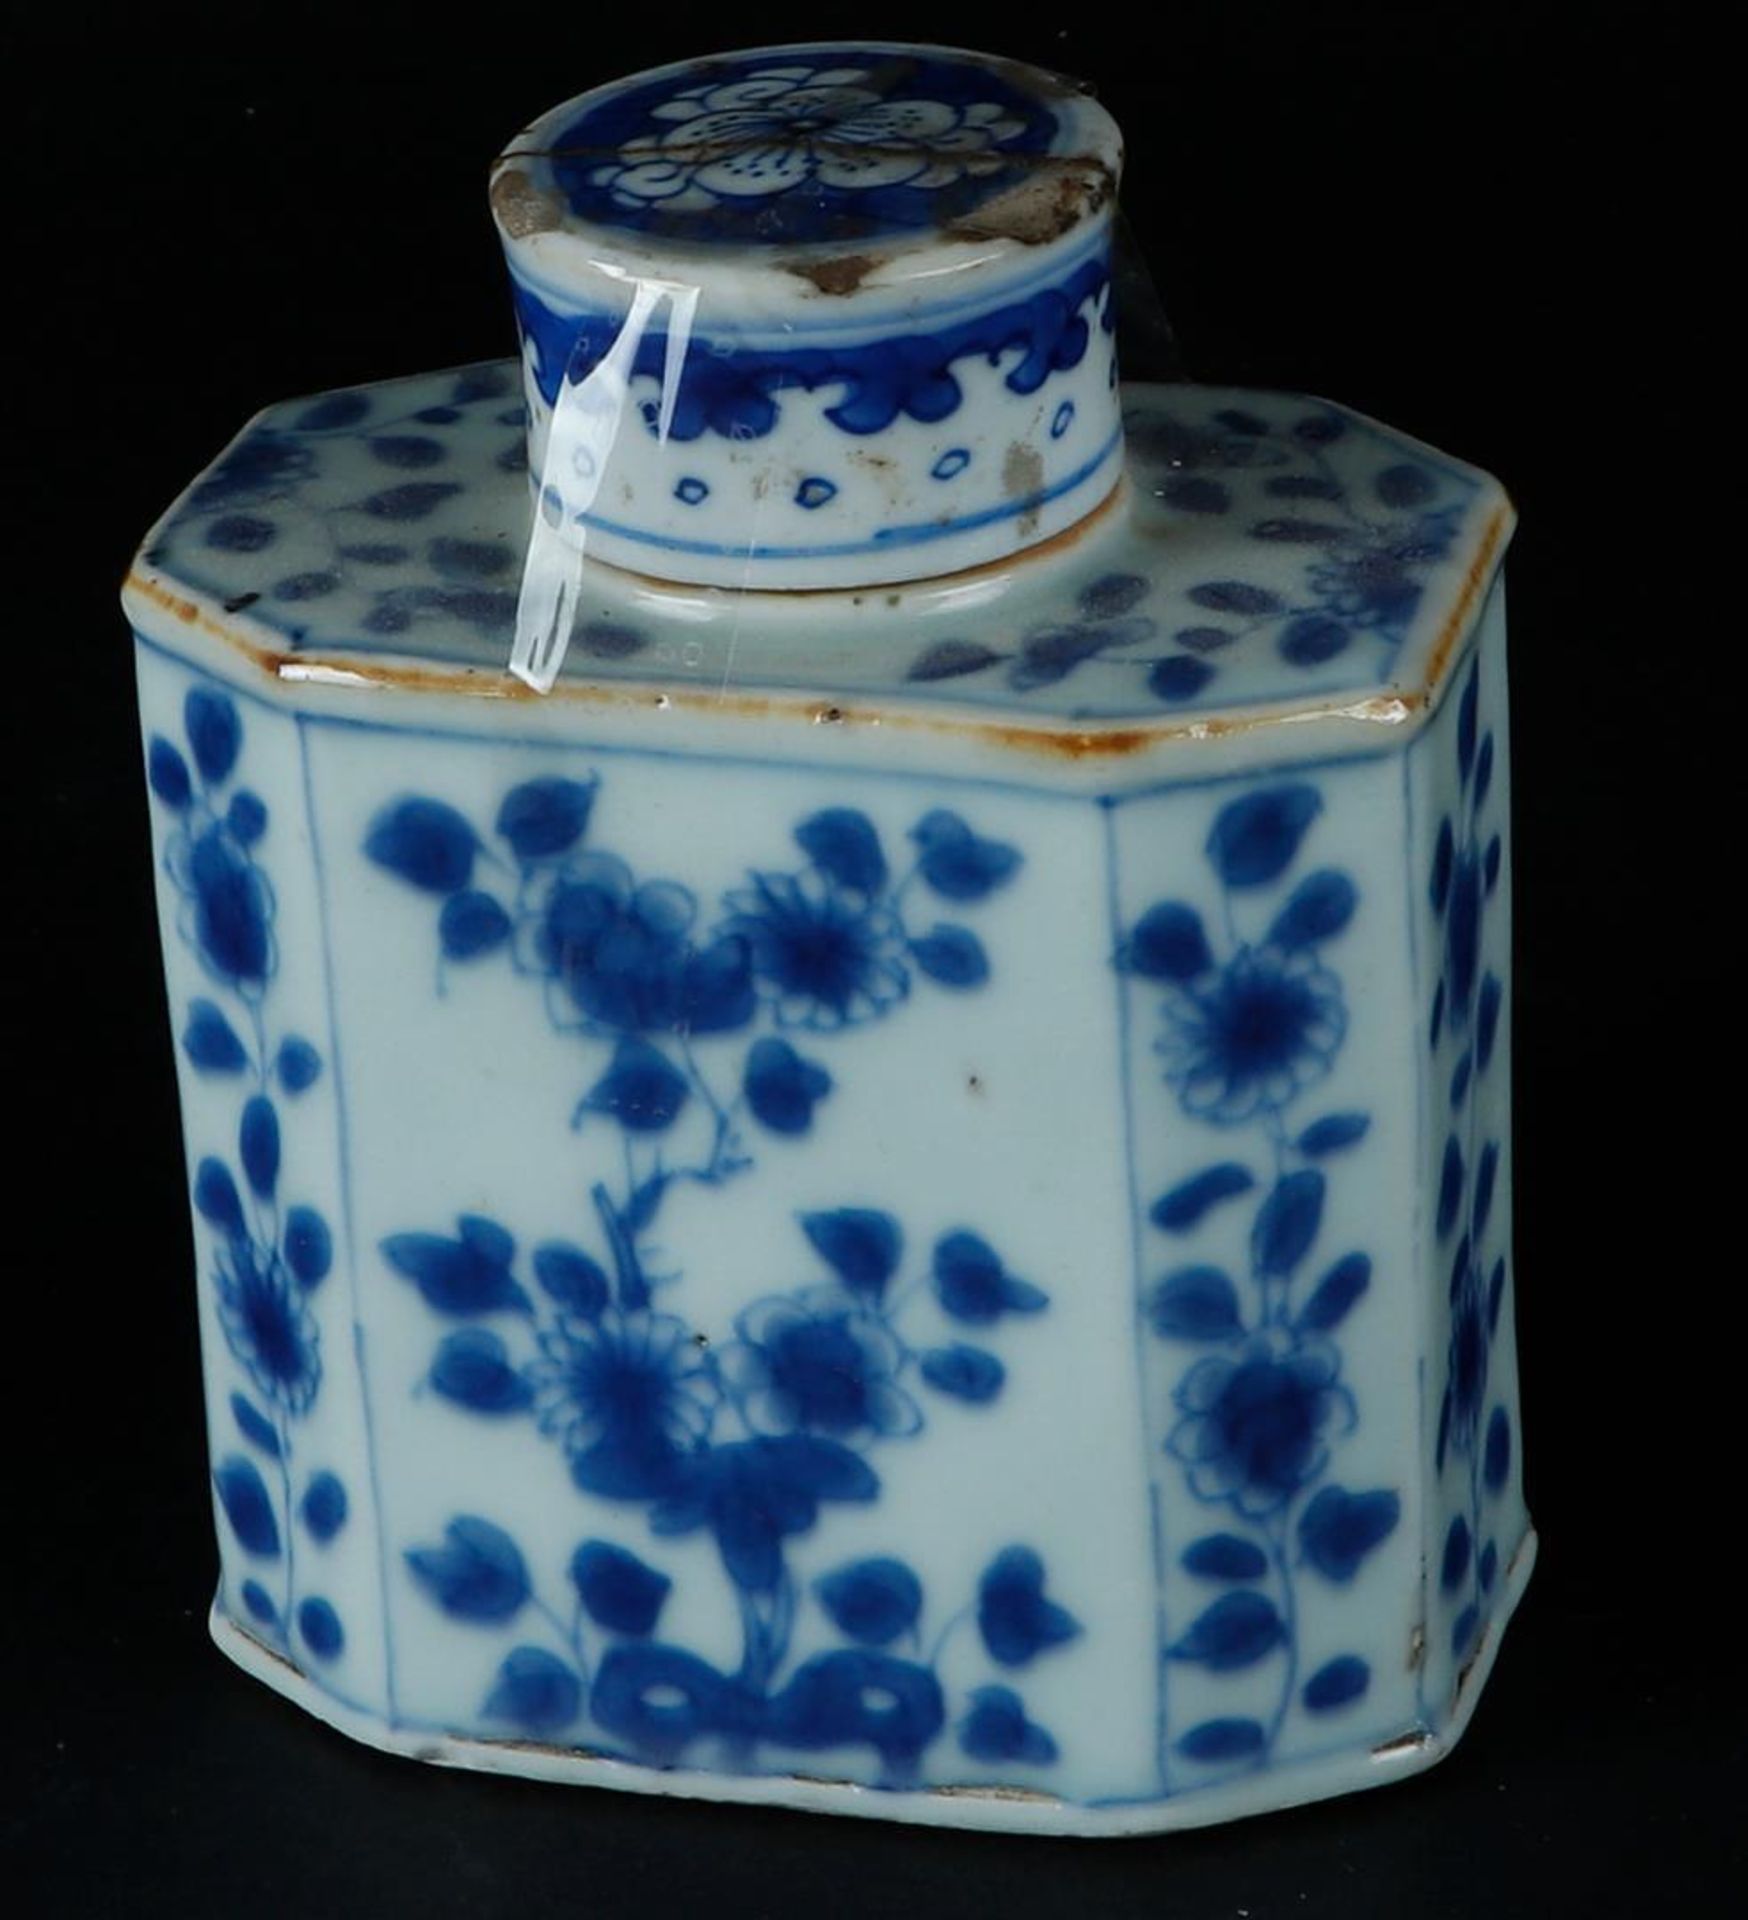 A porcelain 8-sided tea caddy with floral decoration on the eight sides. China, Kangxi/Yongzheng.